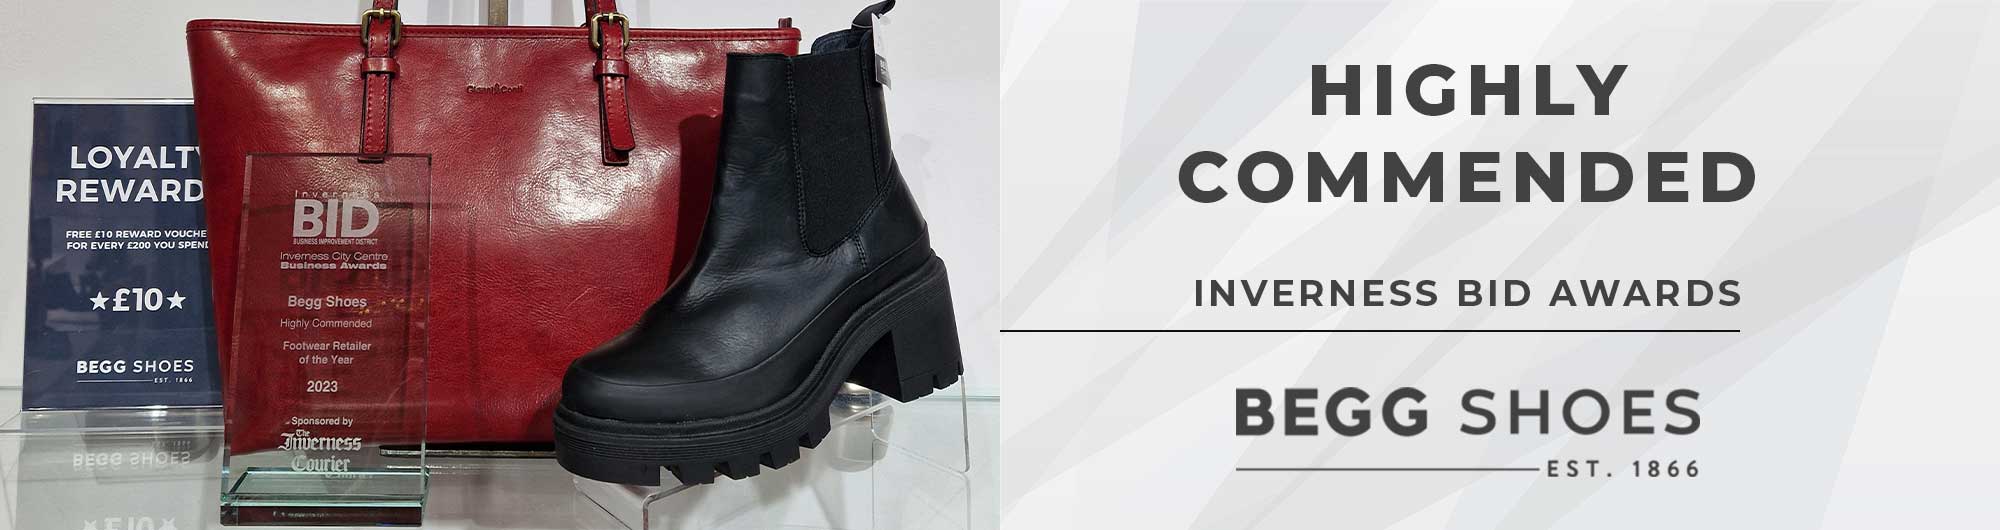 Begg Shoes won a Highly Commended award in the Independent Retailer of the Year category at the Inverness BID Awards, 2023.  Inverness BID Awards 2023, Begg Shoes won a Highly Commended award for Independent Retailer of the Year